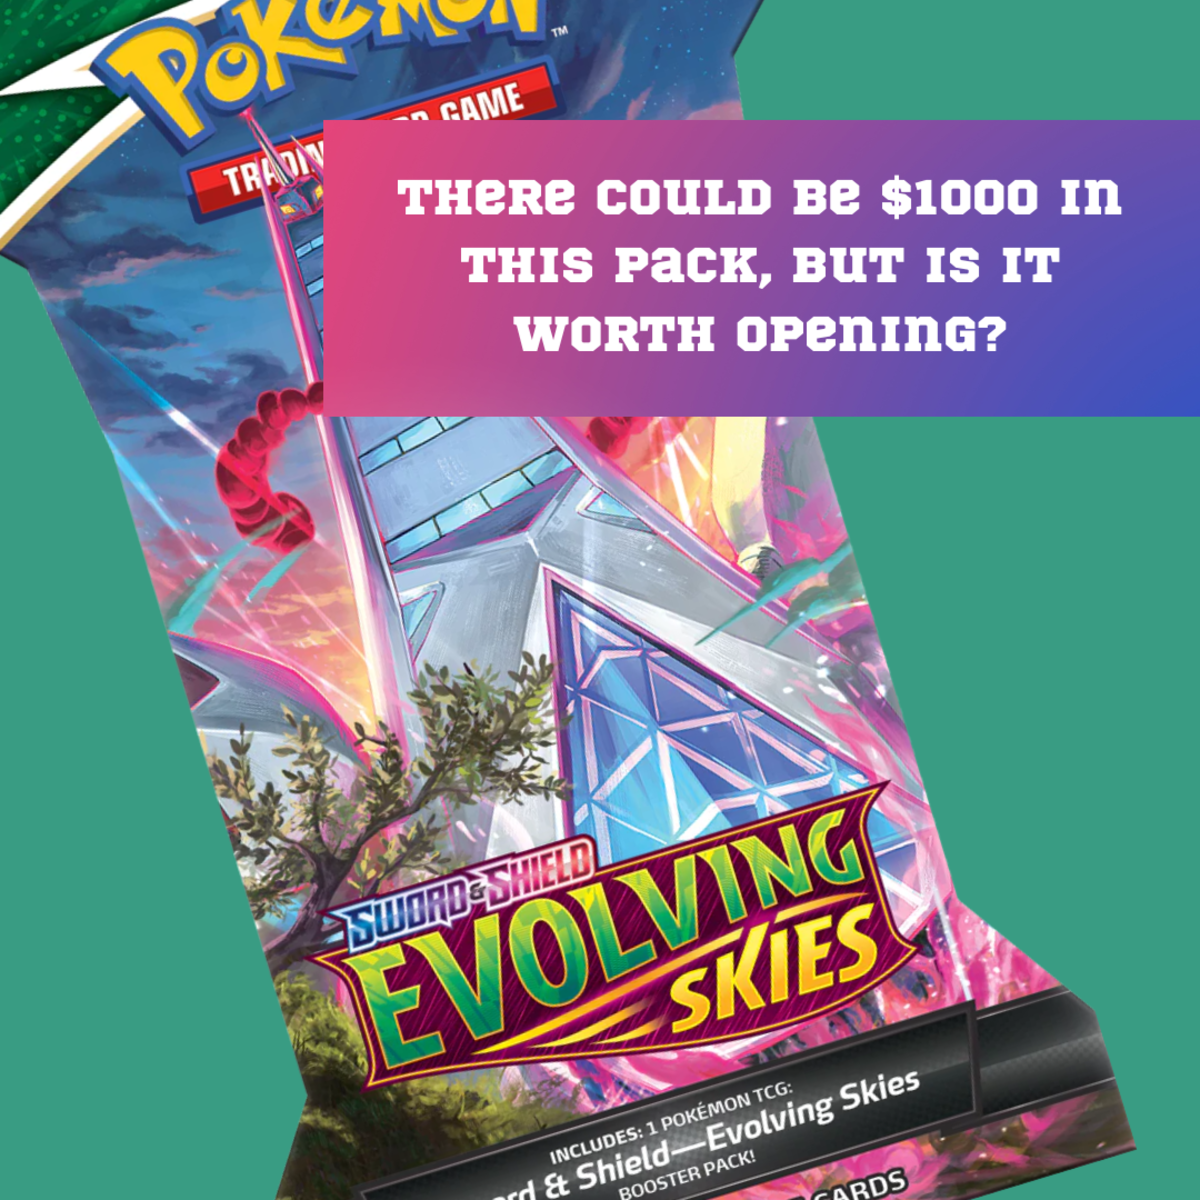 Pokemon Trading Card Game: Sword and Shield - Evolving Skies Three Booster  Packs for sale online